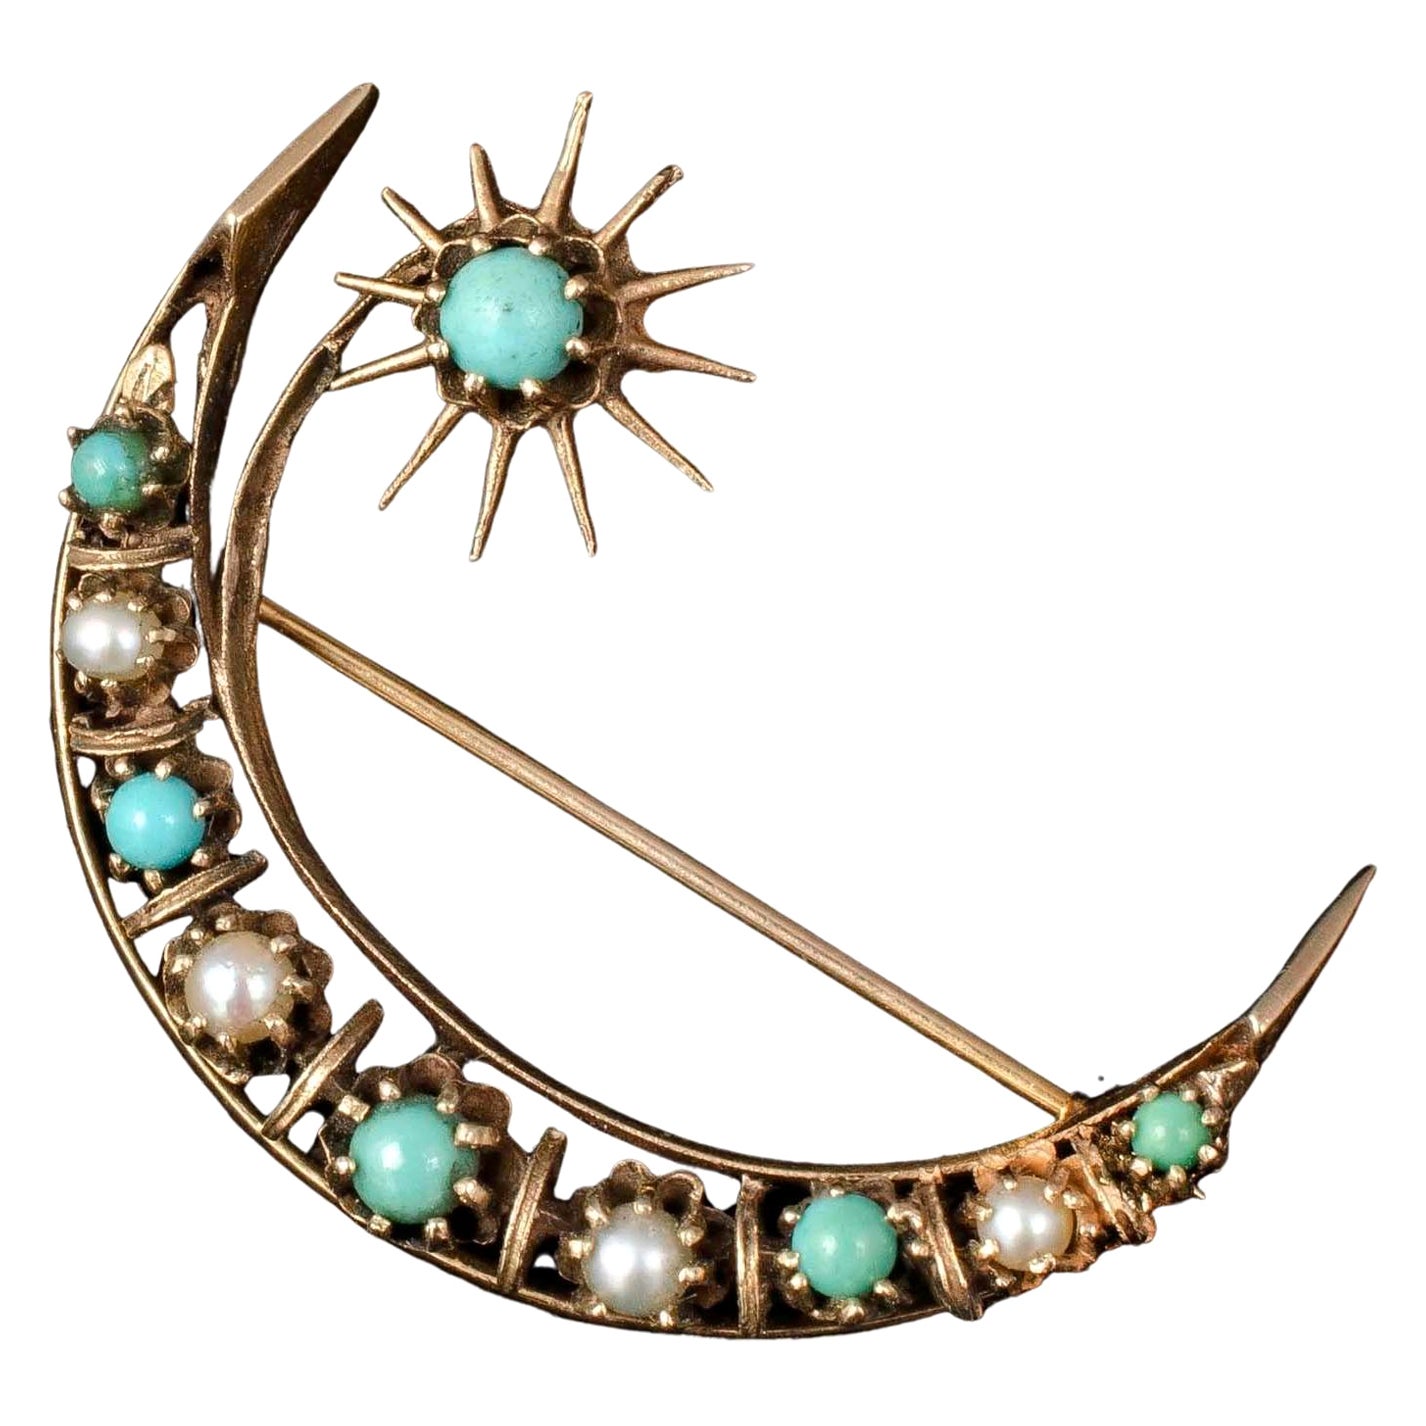 14k Gold Seed, Pearls, Turquoise Victorian Revival Crescent Moon Star Pin Brooch